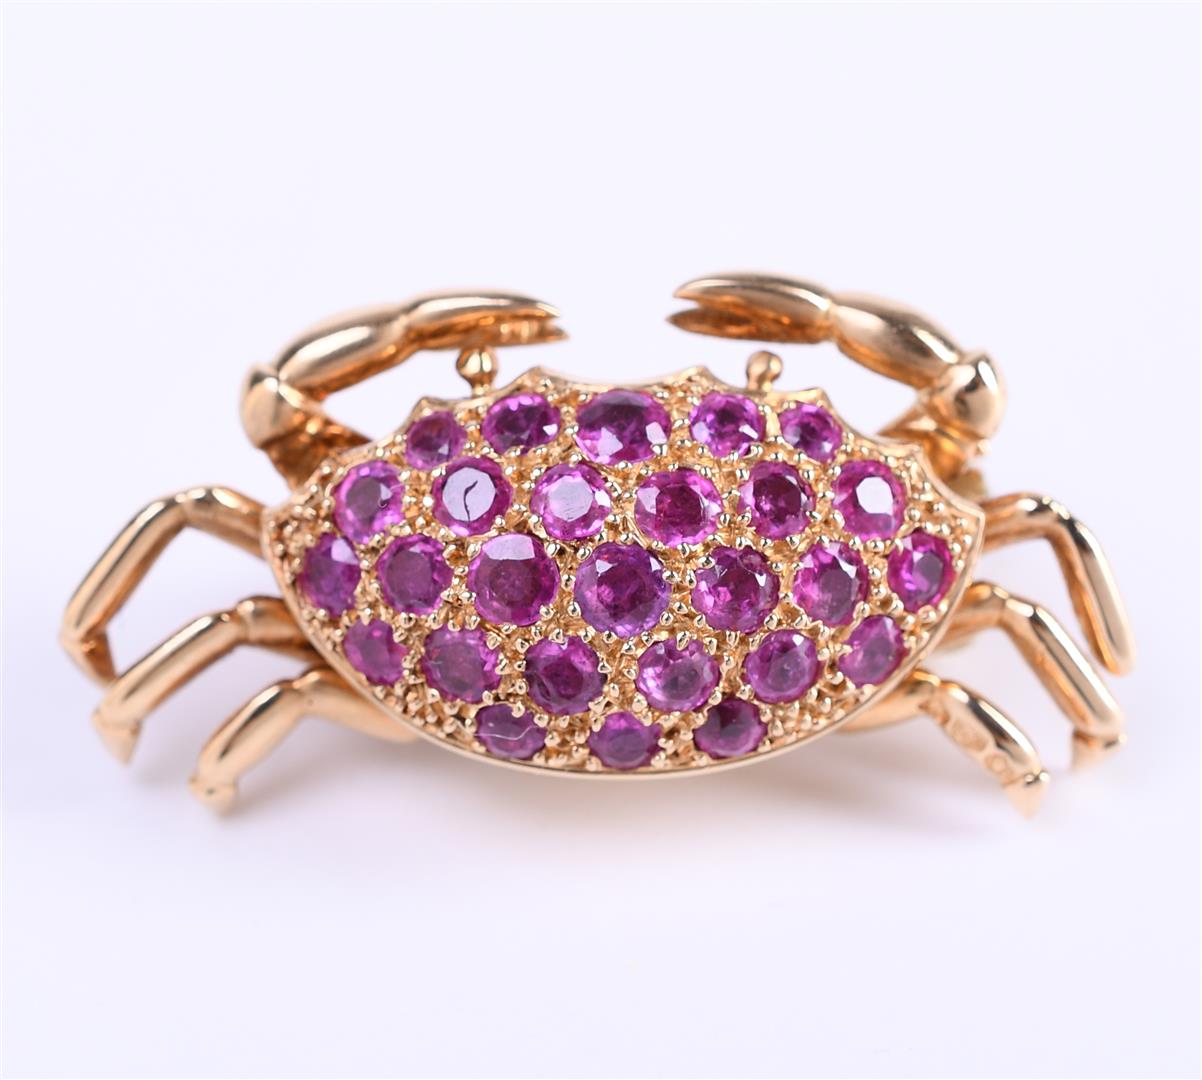 14 carat yellow gold ladies brooch with extra safety chain. In the shape of a crab